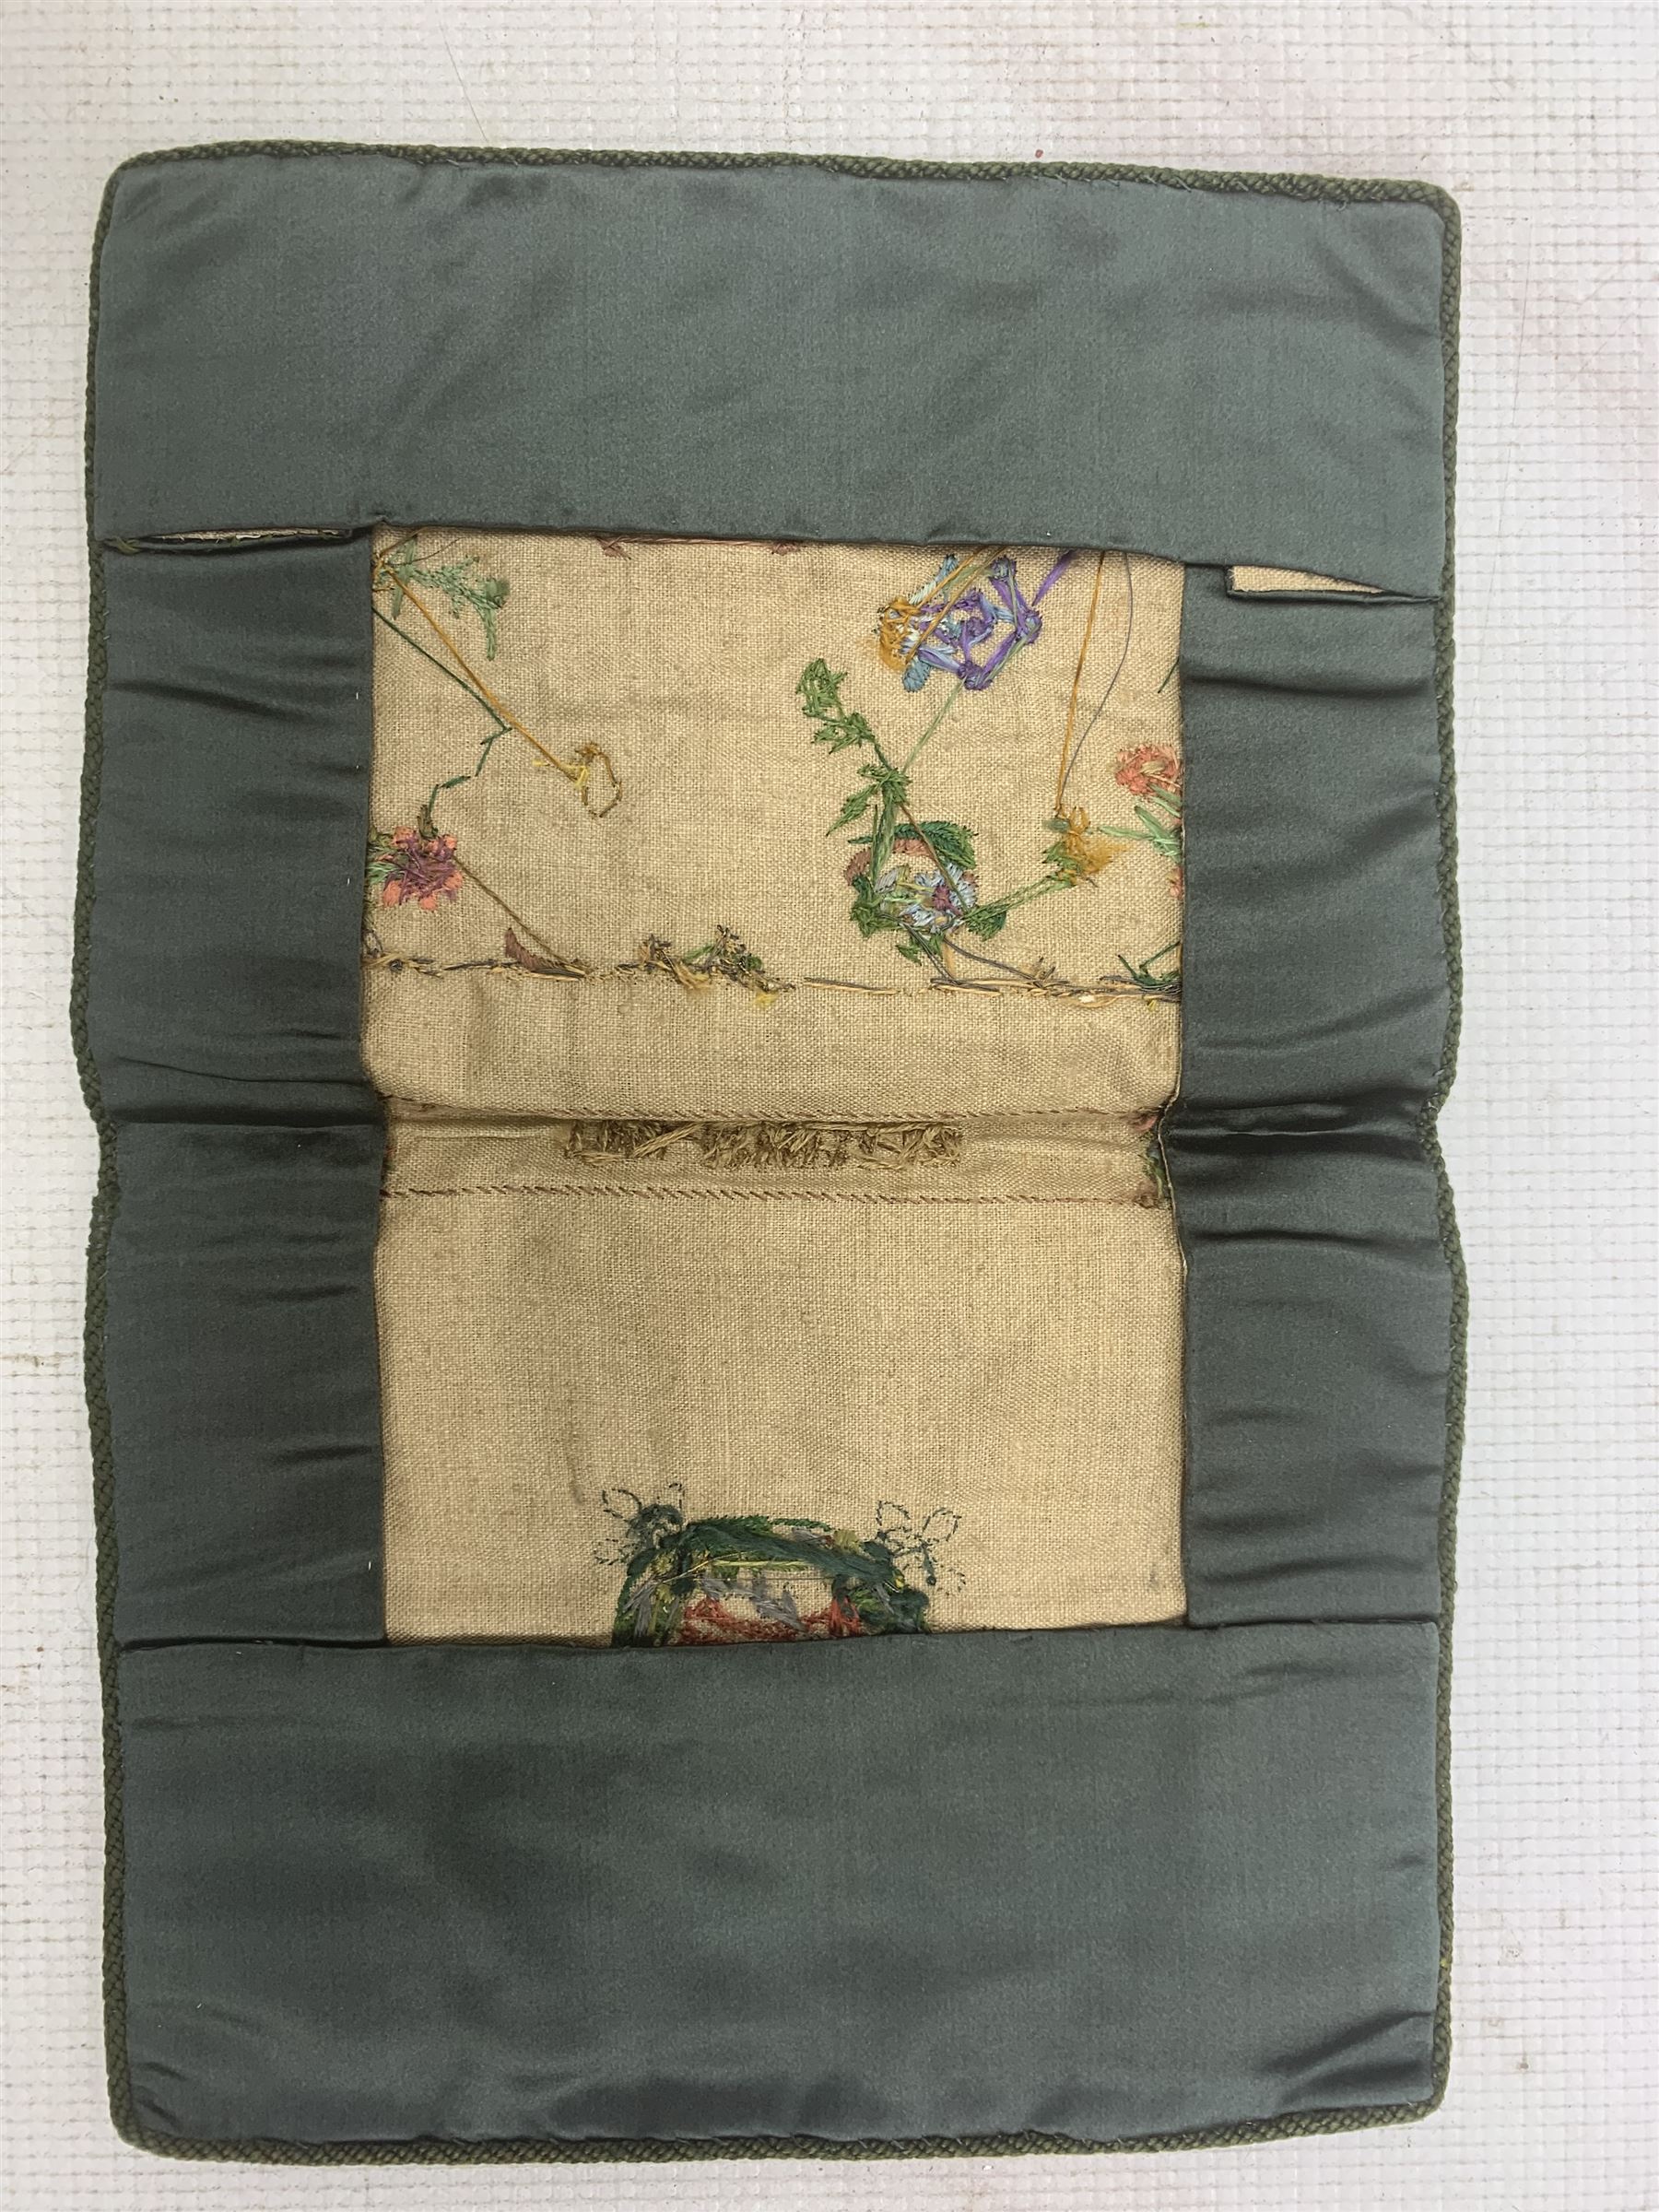 19th century embroidered binding - Image 4 of 4